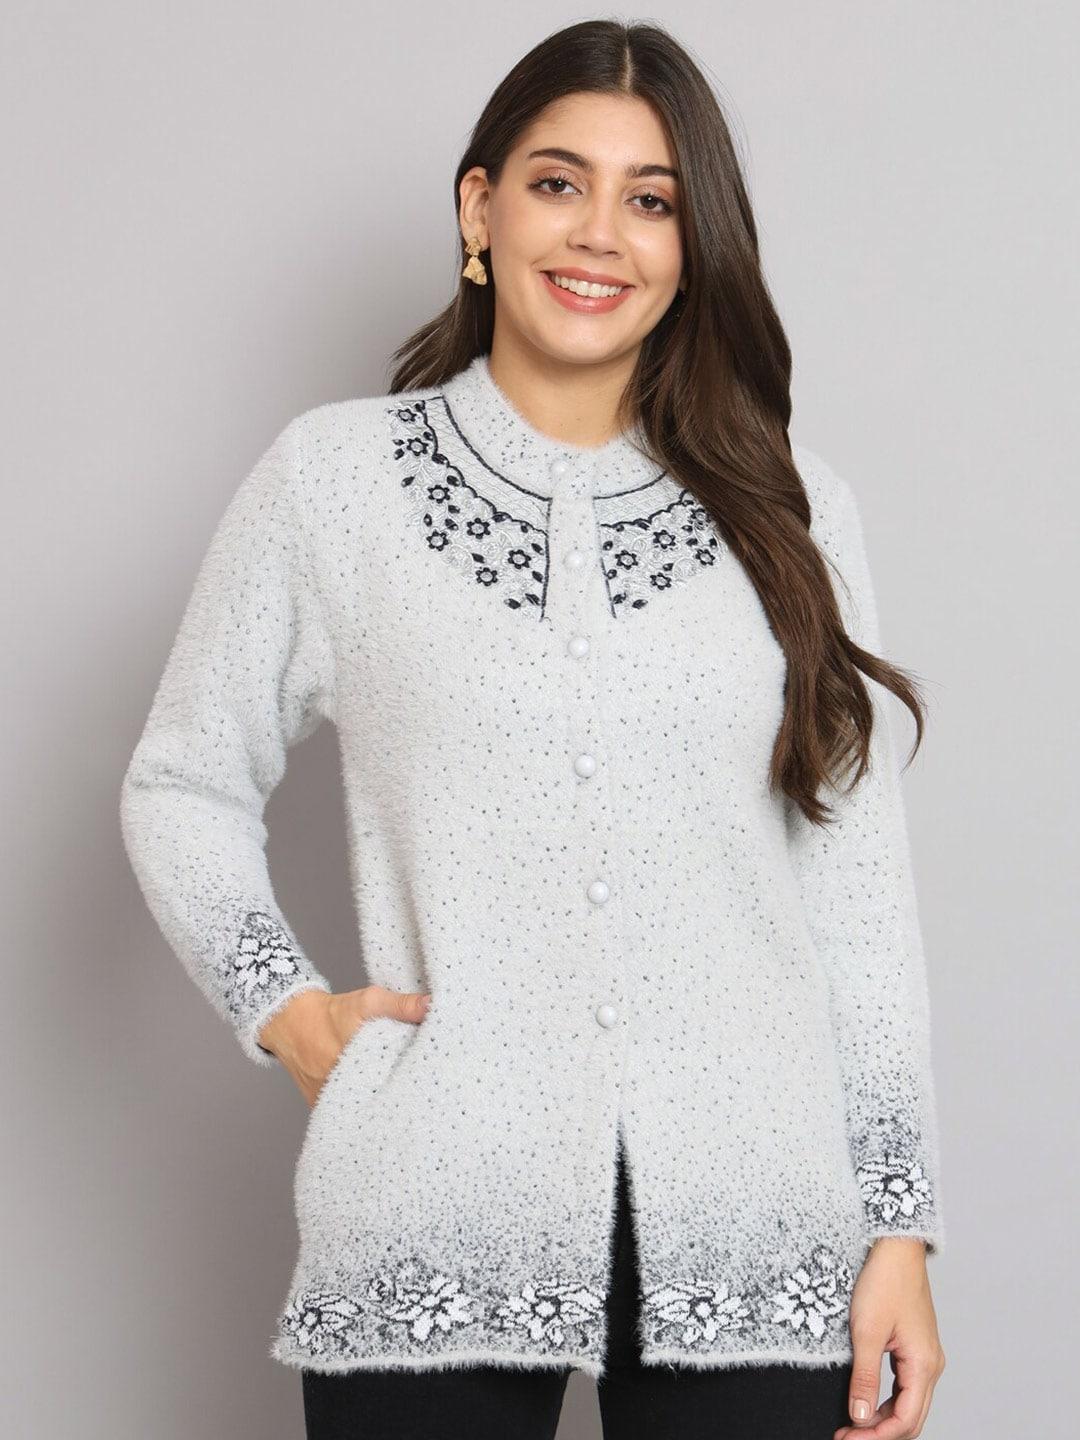 ewools floral embroidered pure woollen cardigan